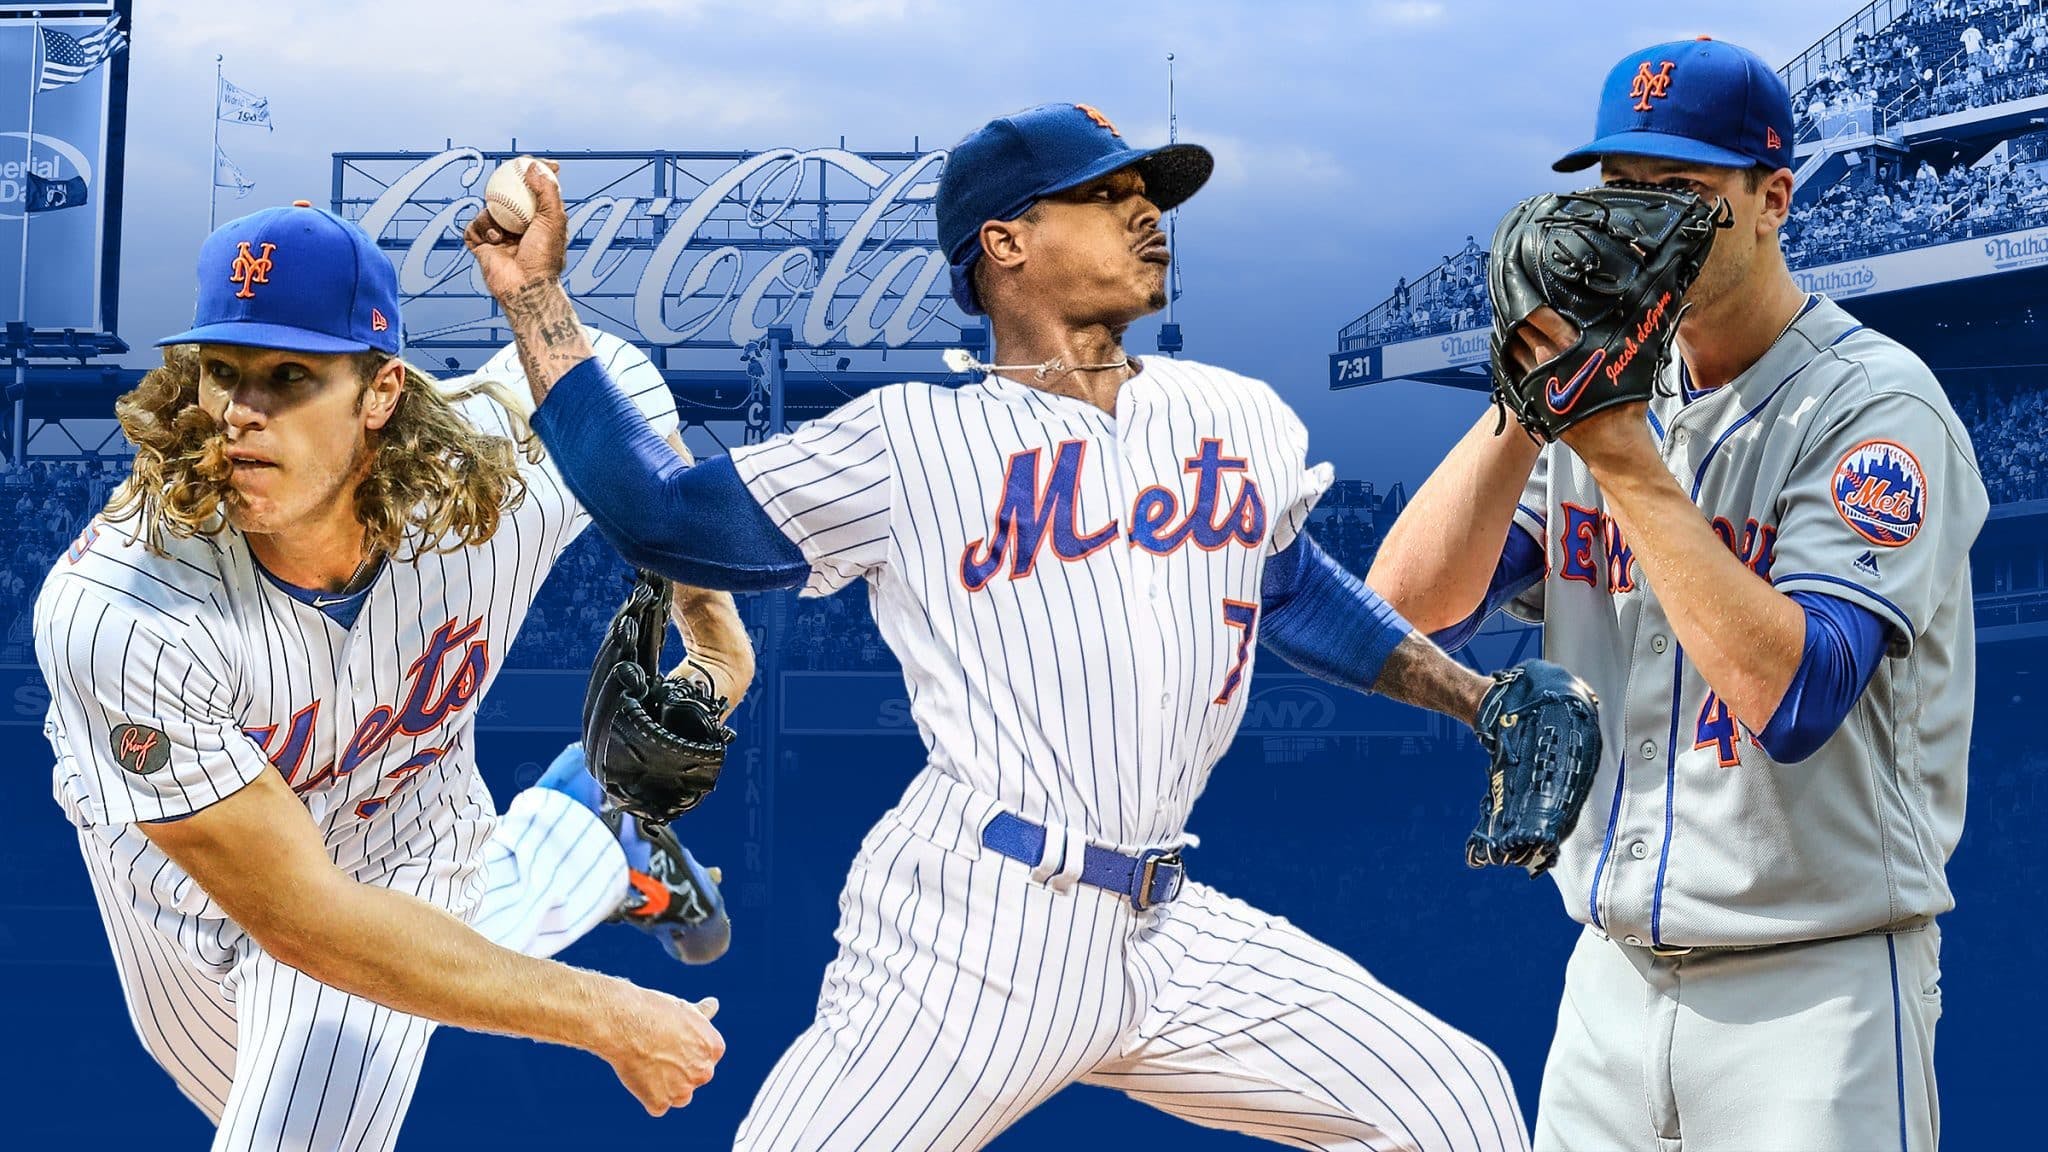 Jacob deGrom, Pete Alonso, Jeff McNeil named All-Stars